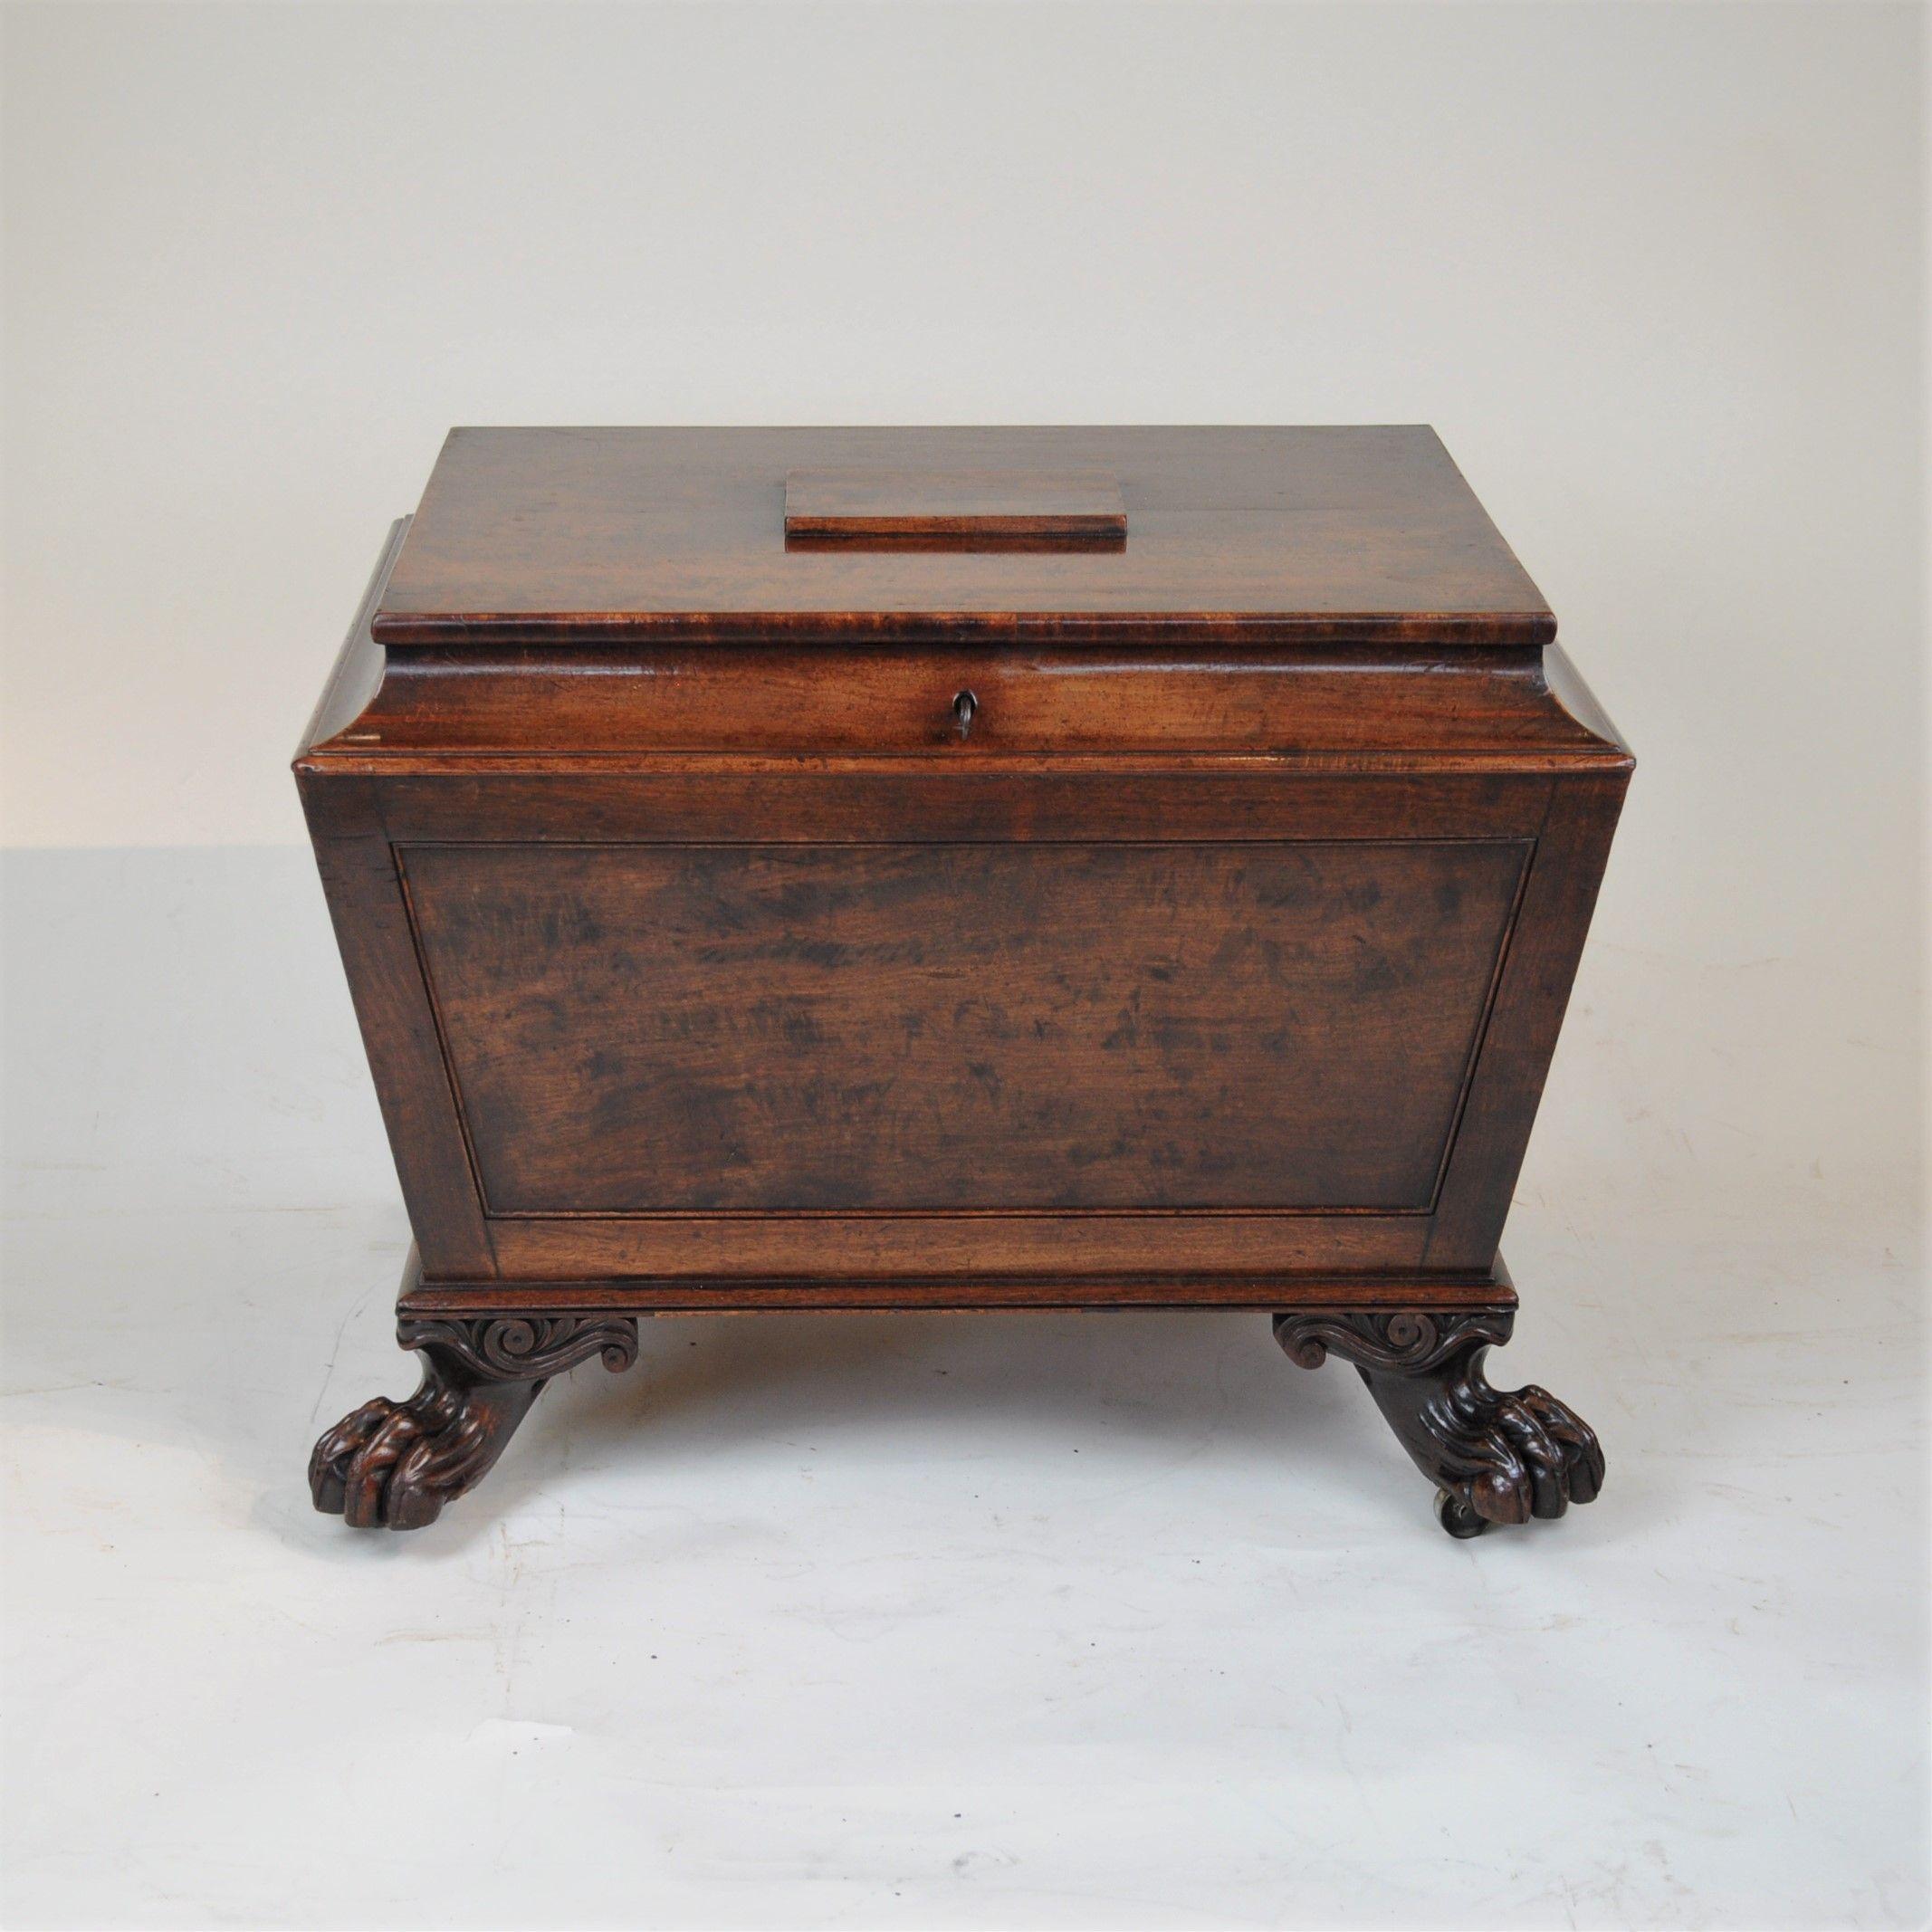 A fine quality Regency period, figured mahogany cellarette, the flat top with slightly raised central panel, opening to reveal a later baize-lined interior. The tapered body and panelled body with original brass lions-mask handles and raised on